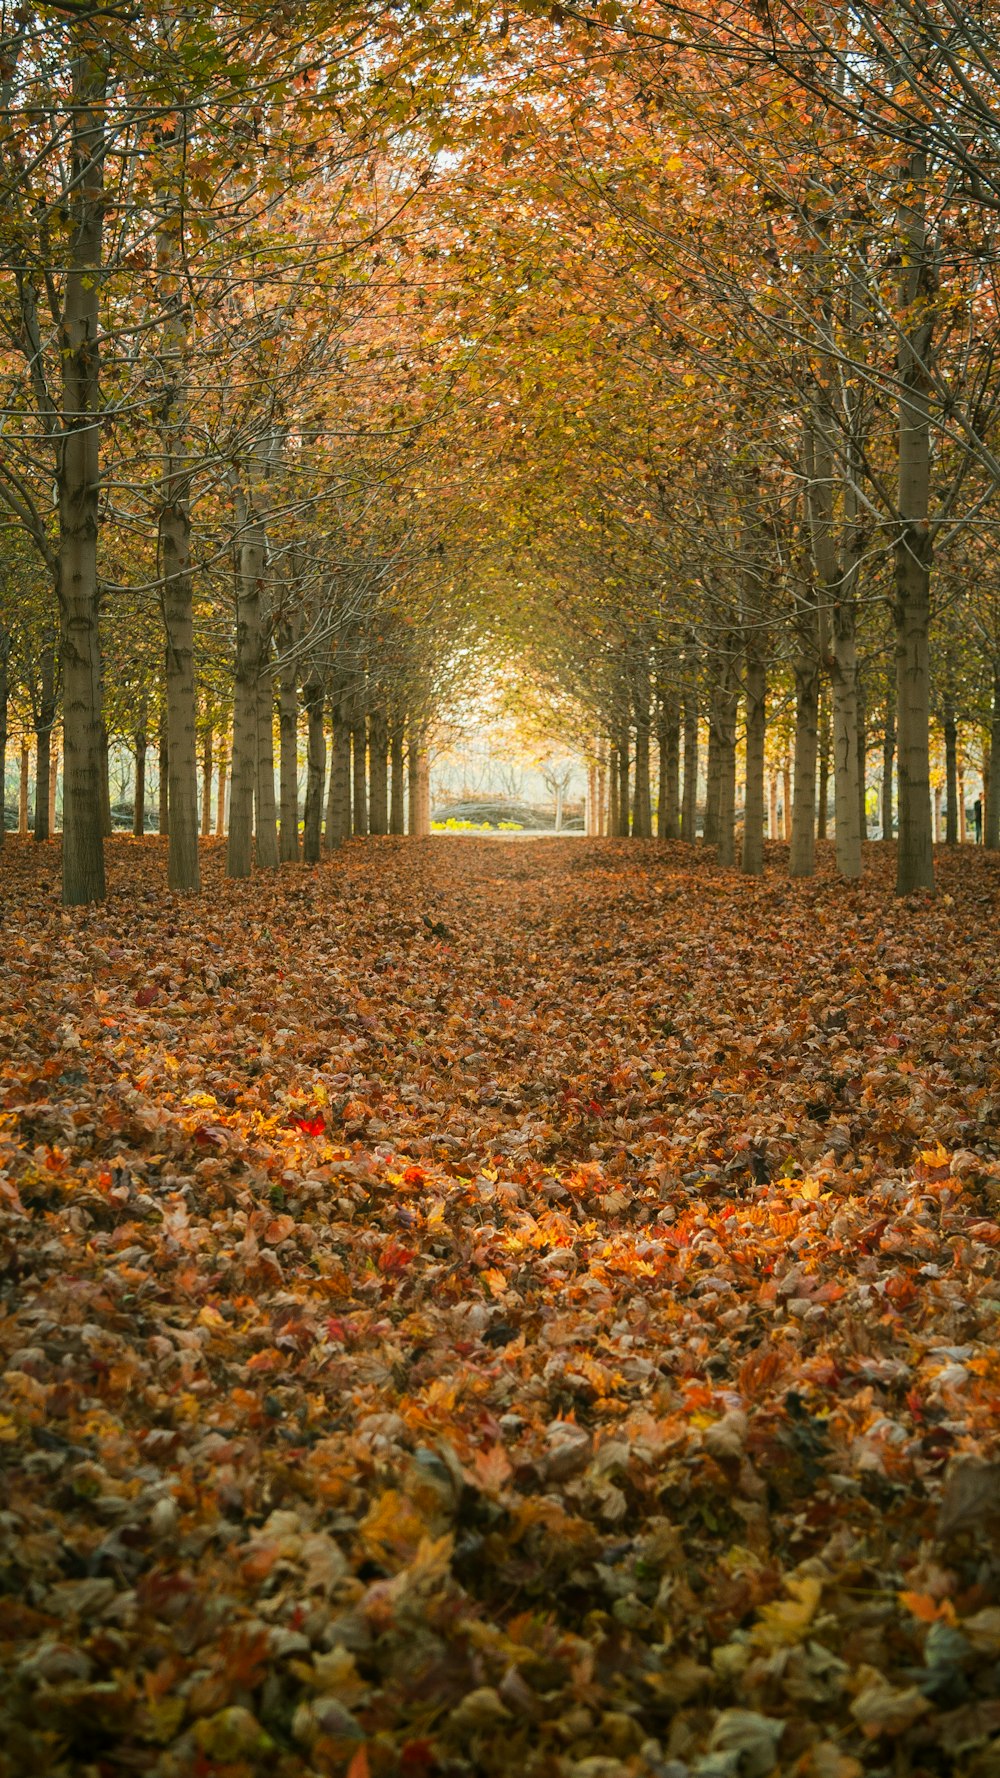 a group of trees with orange leaves